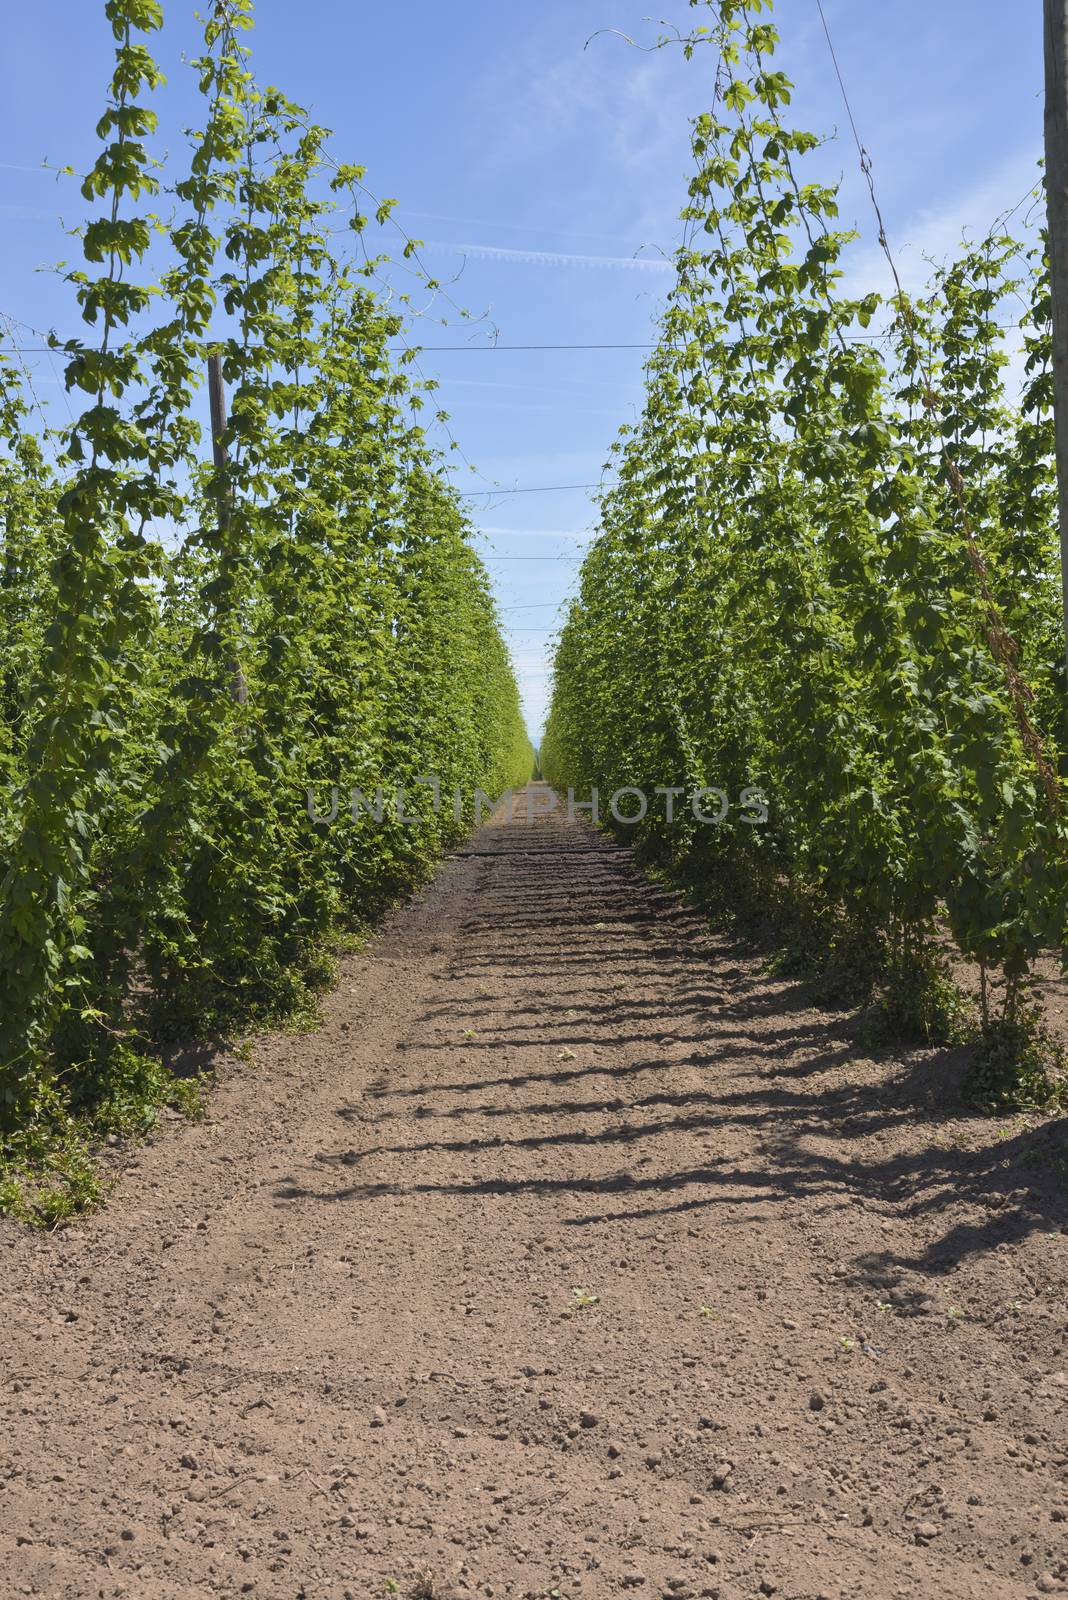 Agriculture and farming hops in the Willamette valley Oregon.